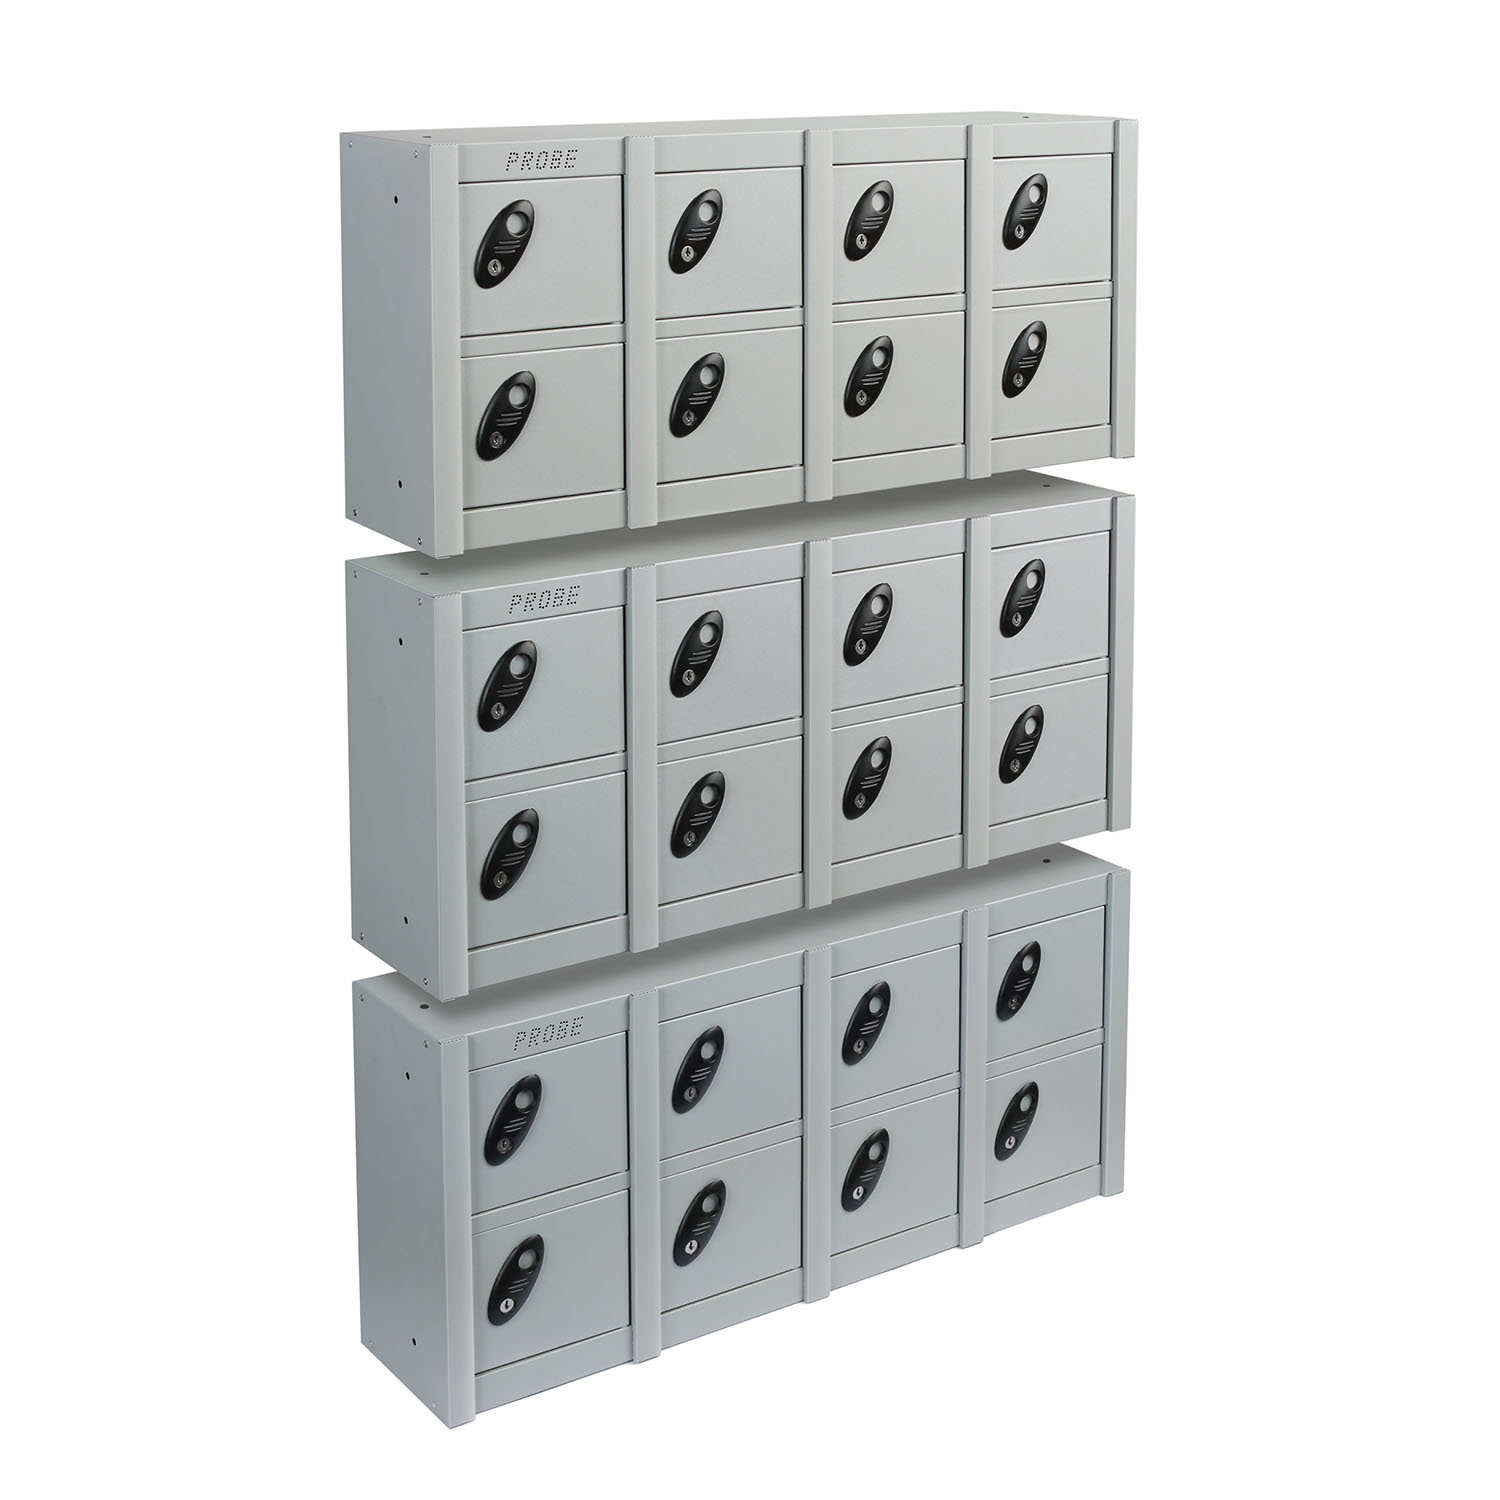 Probe 8 doors minibox wall mounted lockers in silver colour